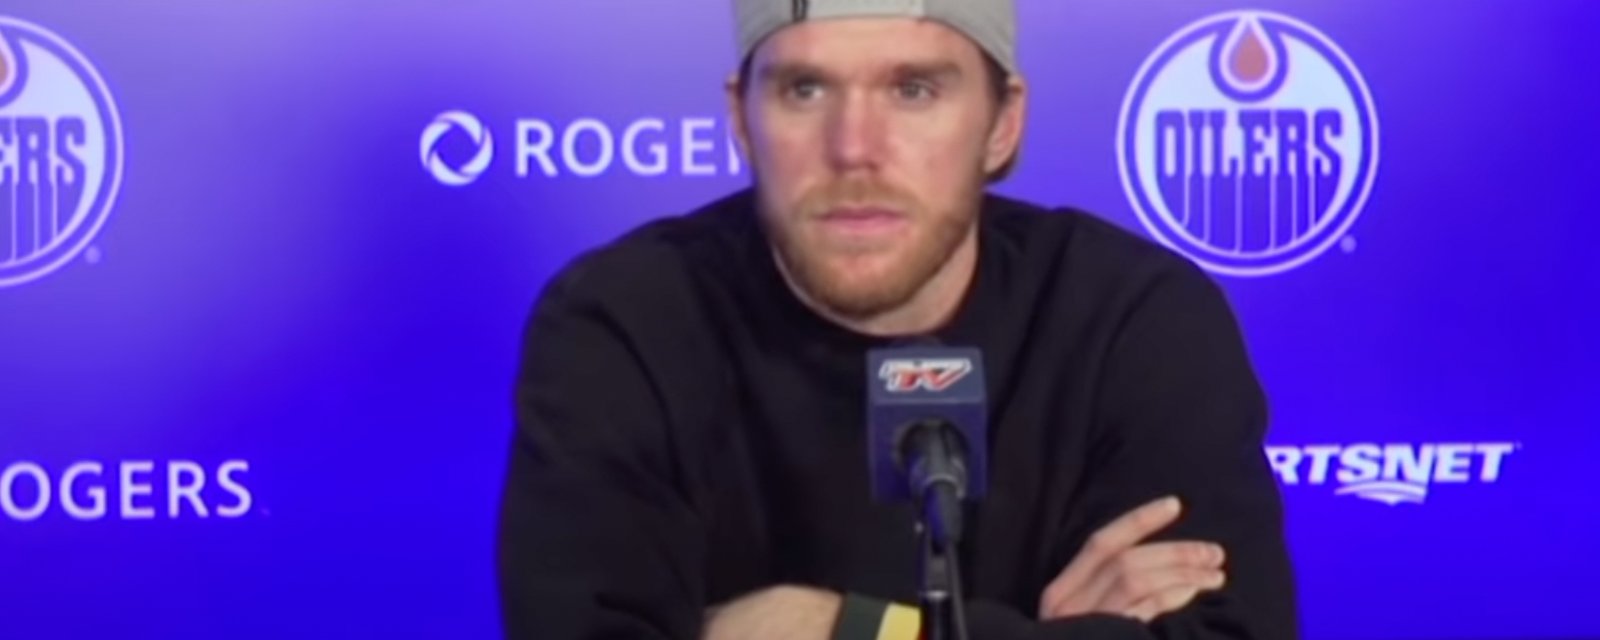 McDavid’s press conference can’t shut down trade rumours 